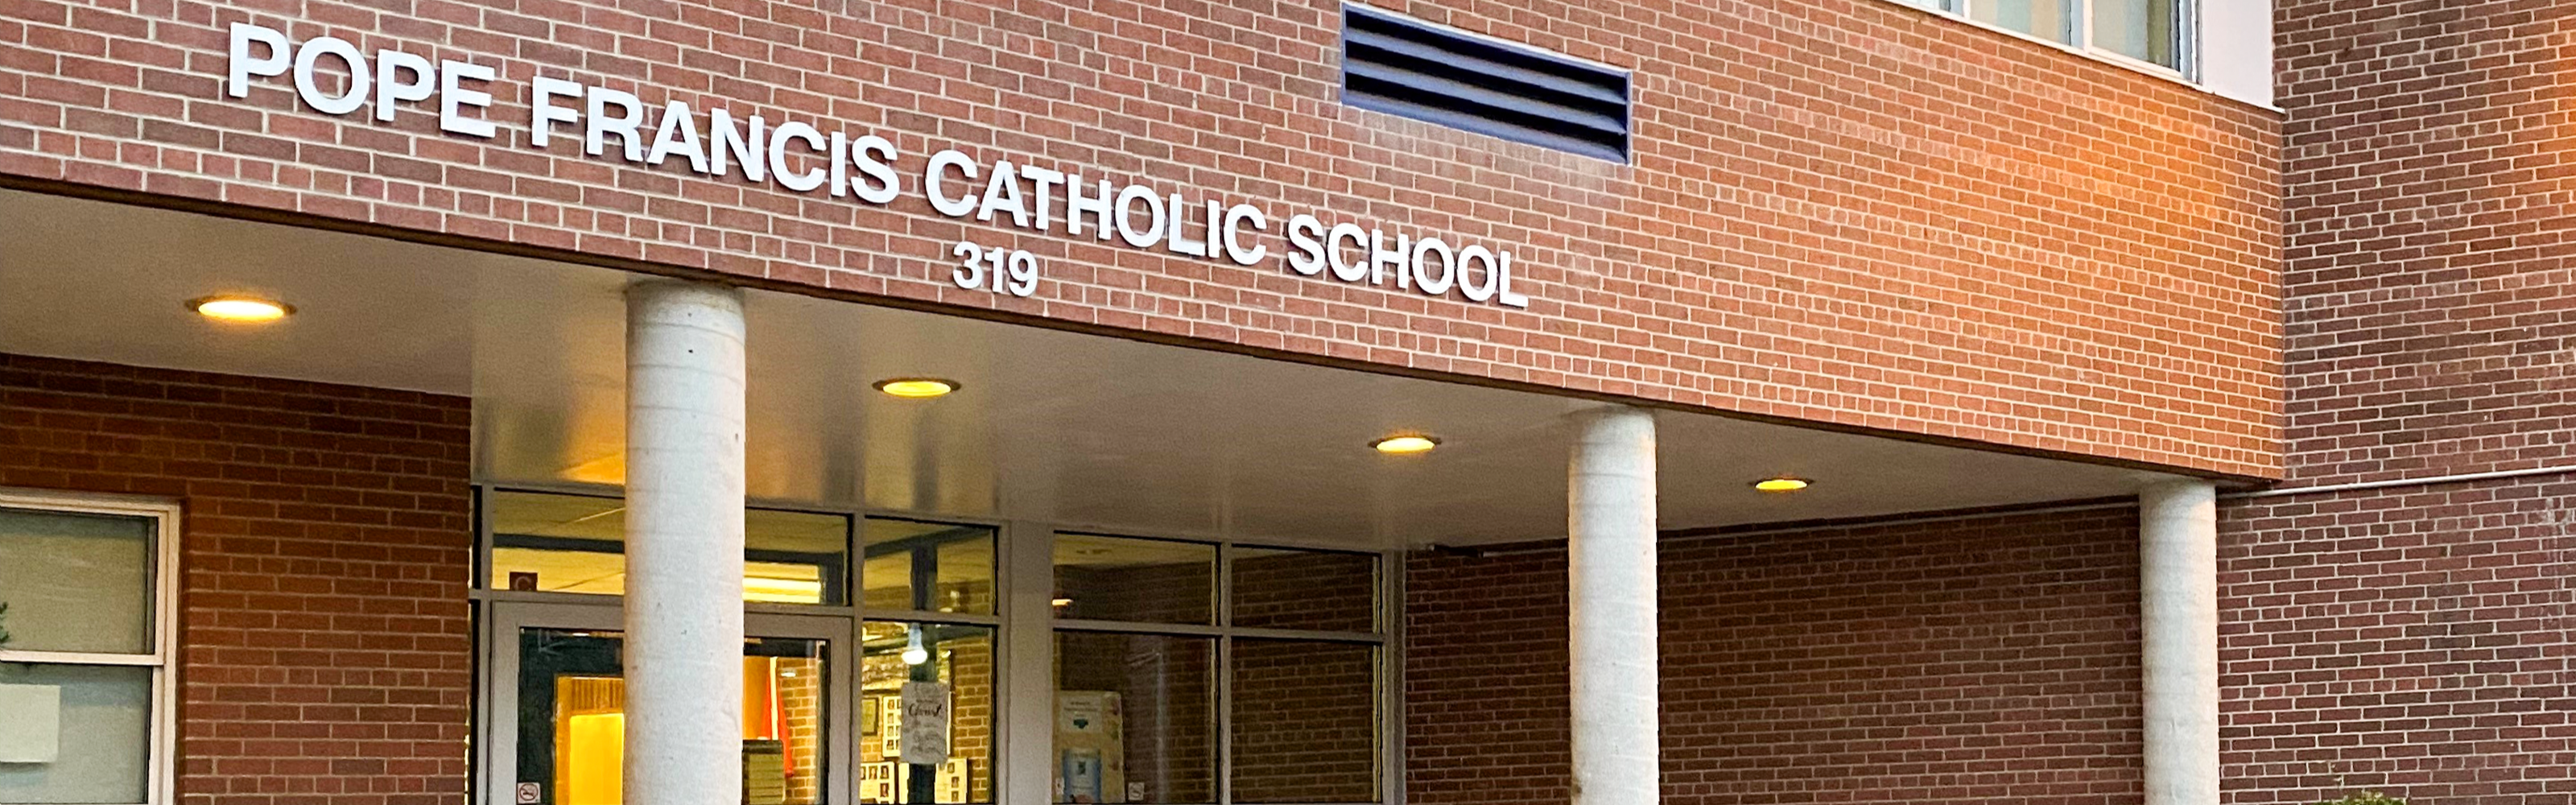 The front of the  Pope Francis Catholic School building.